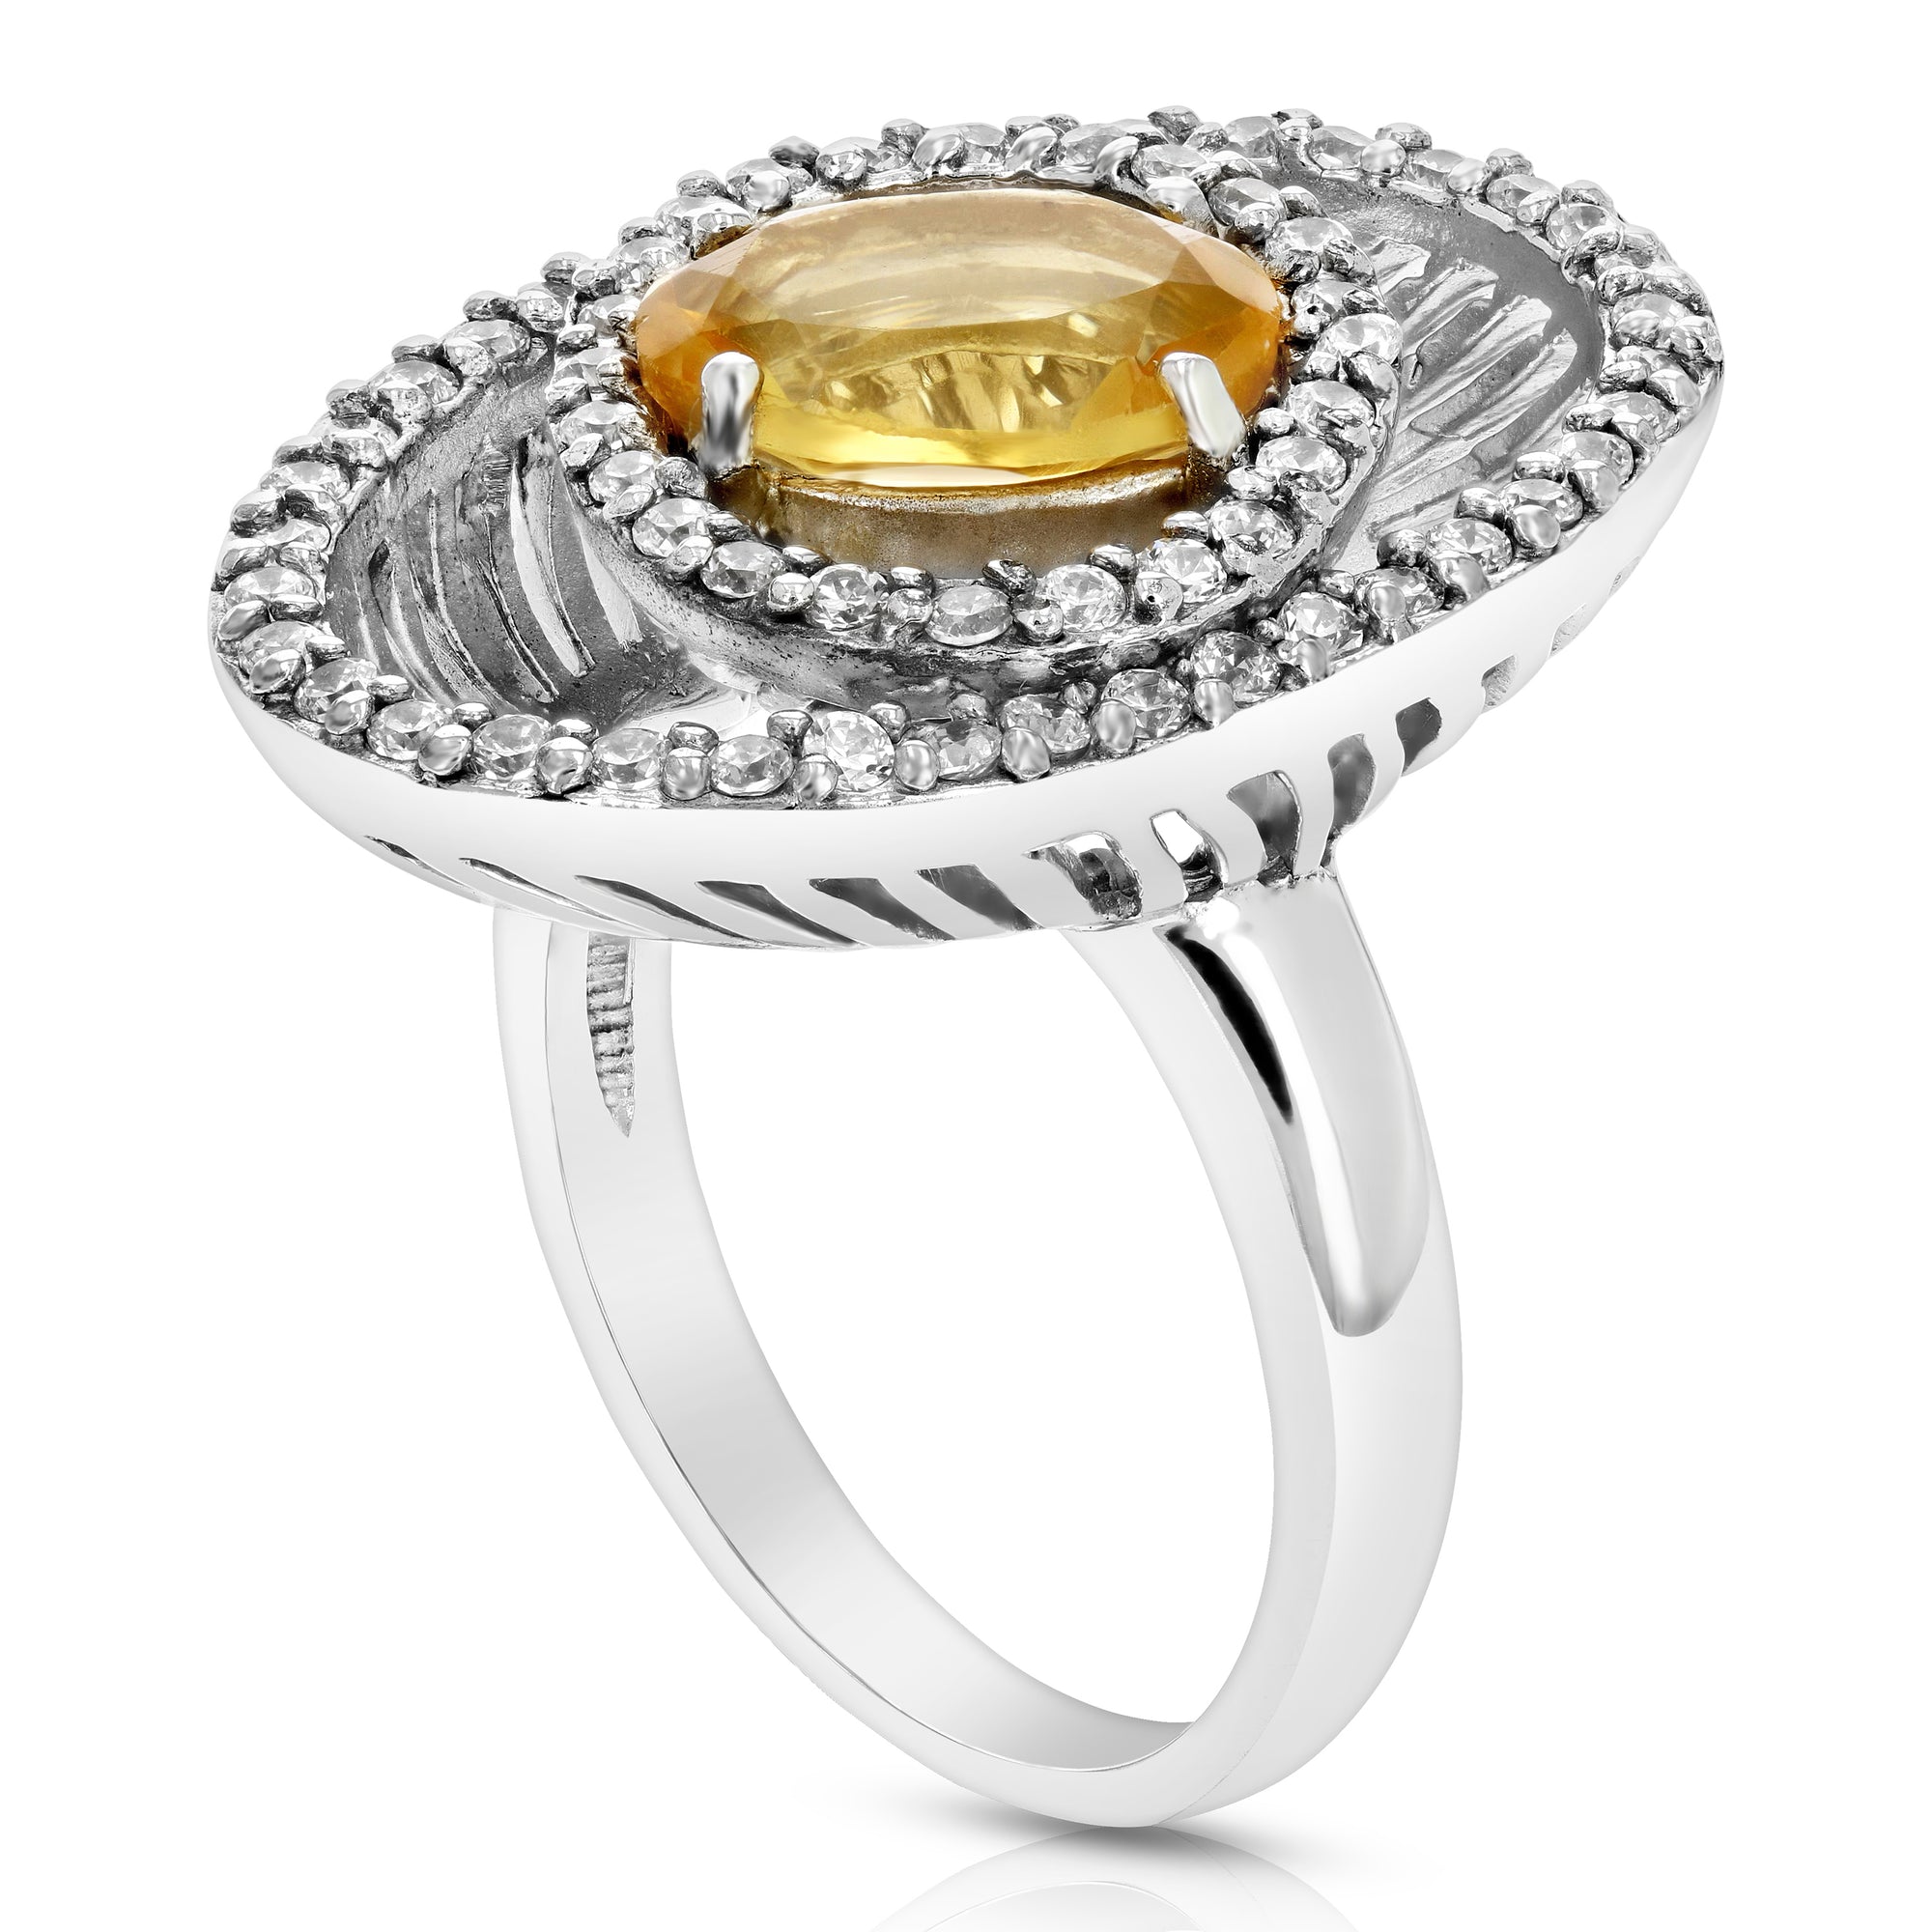 2 cttw Citrine Ring in .925 Sterling Silver with Rhodium Plating Oval Halo 6 MM